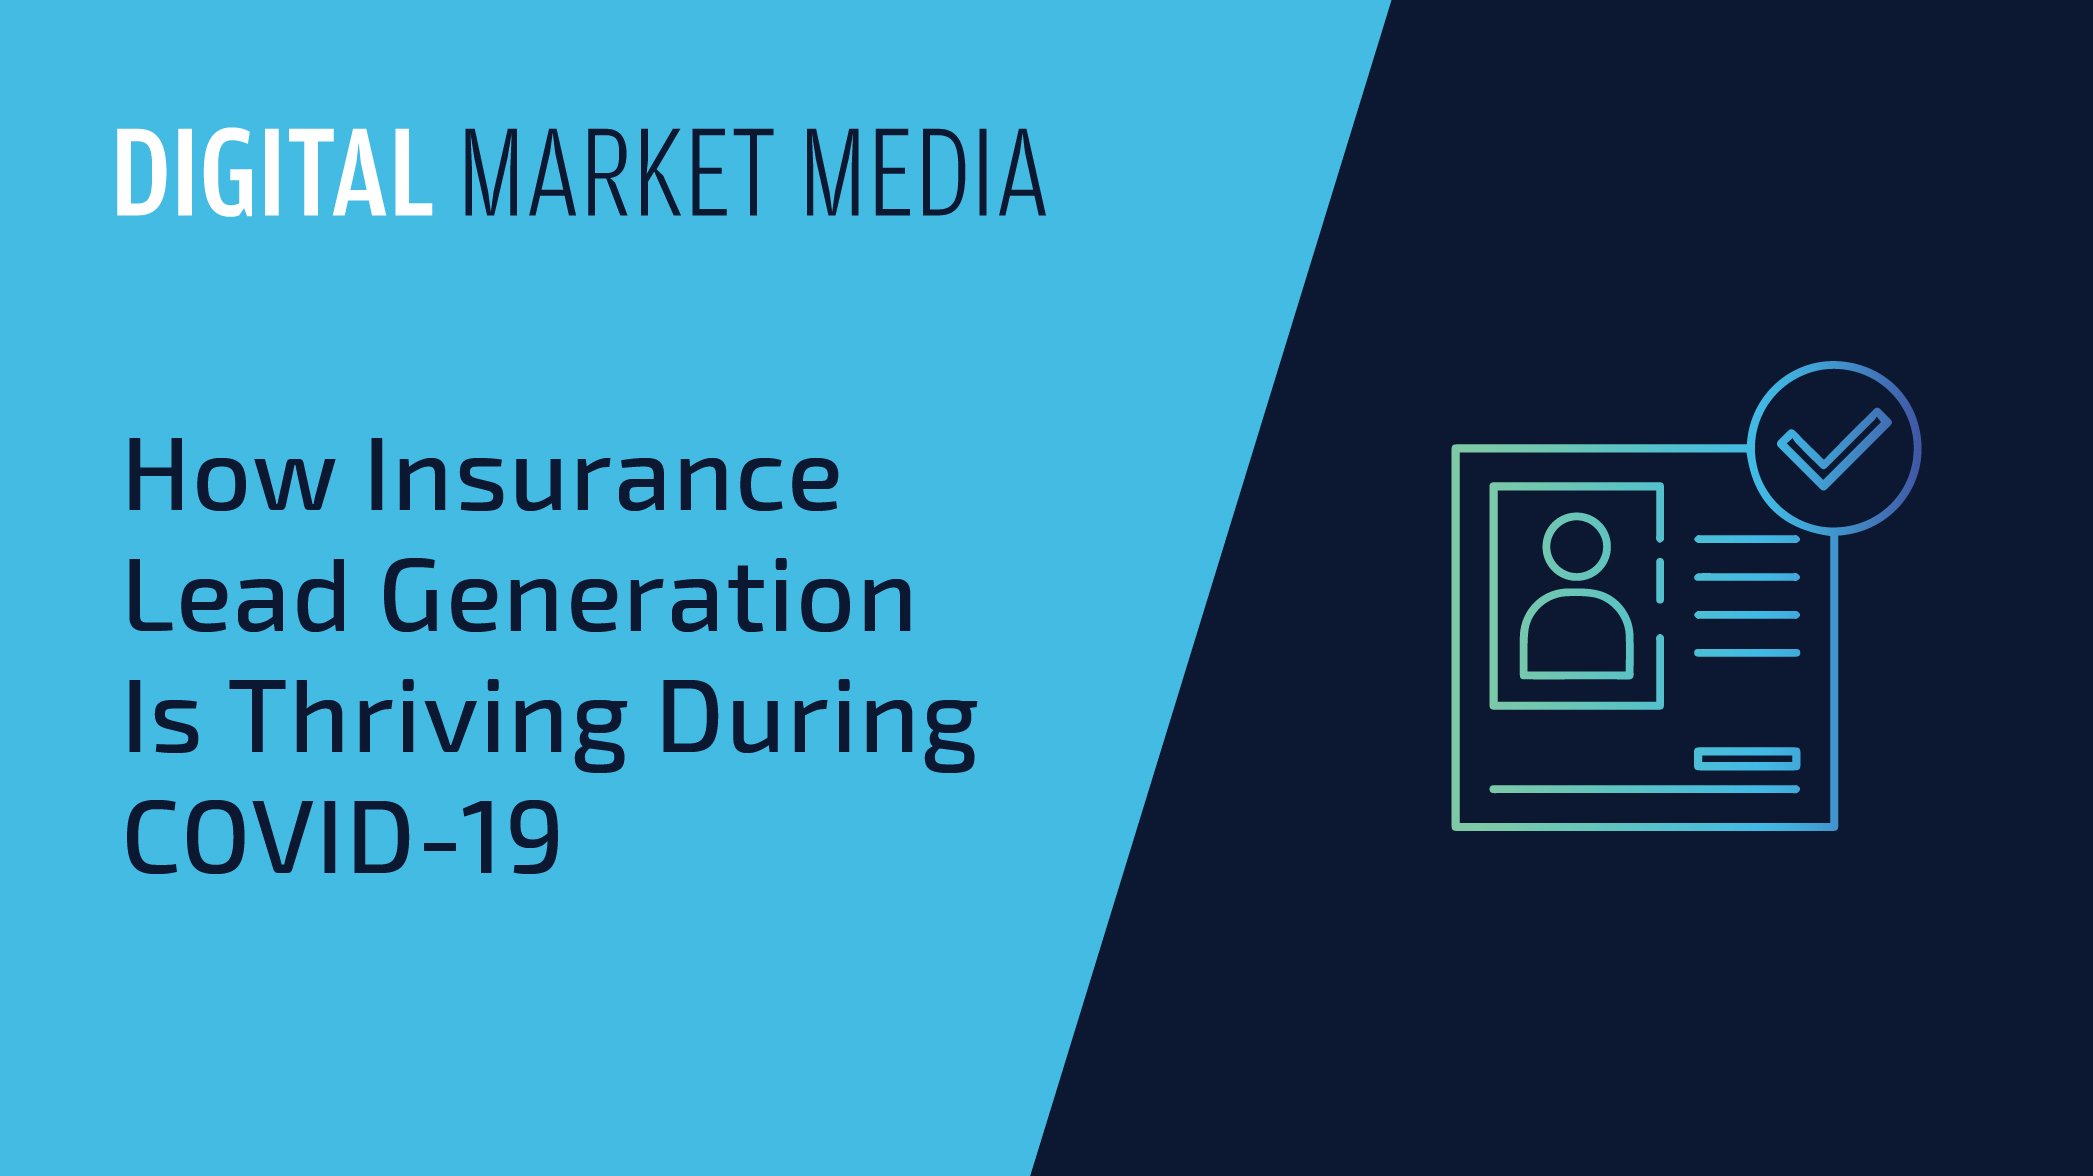 How Insurance Lead Generation Is Thriving During COVID-19